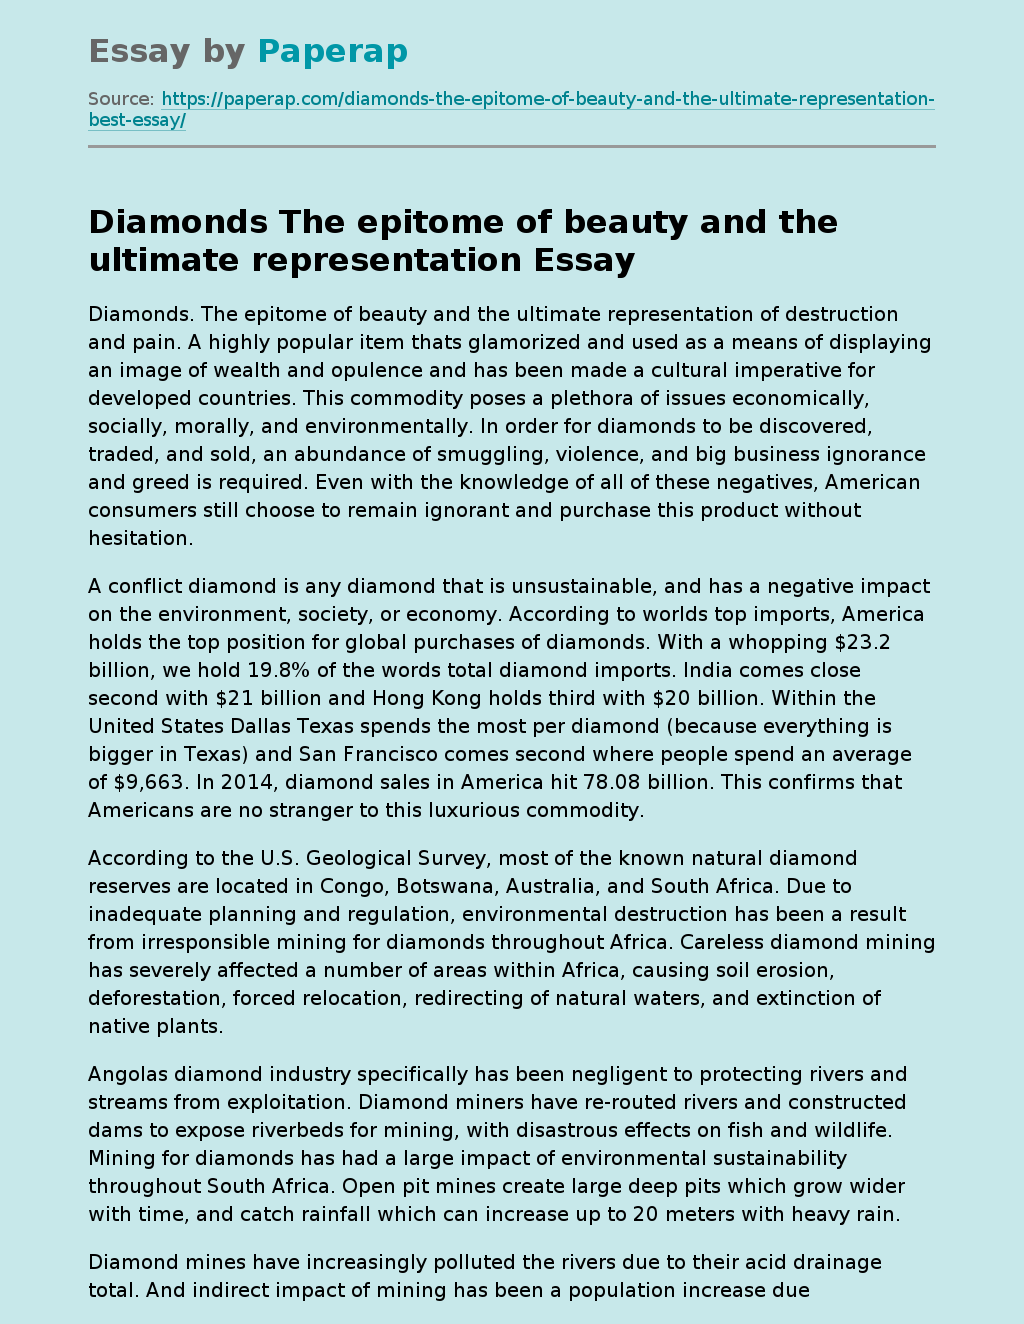 Diamonds The epitome of beauty and the ultimate representation